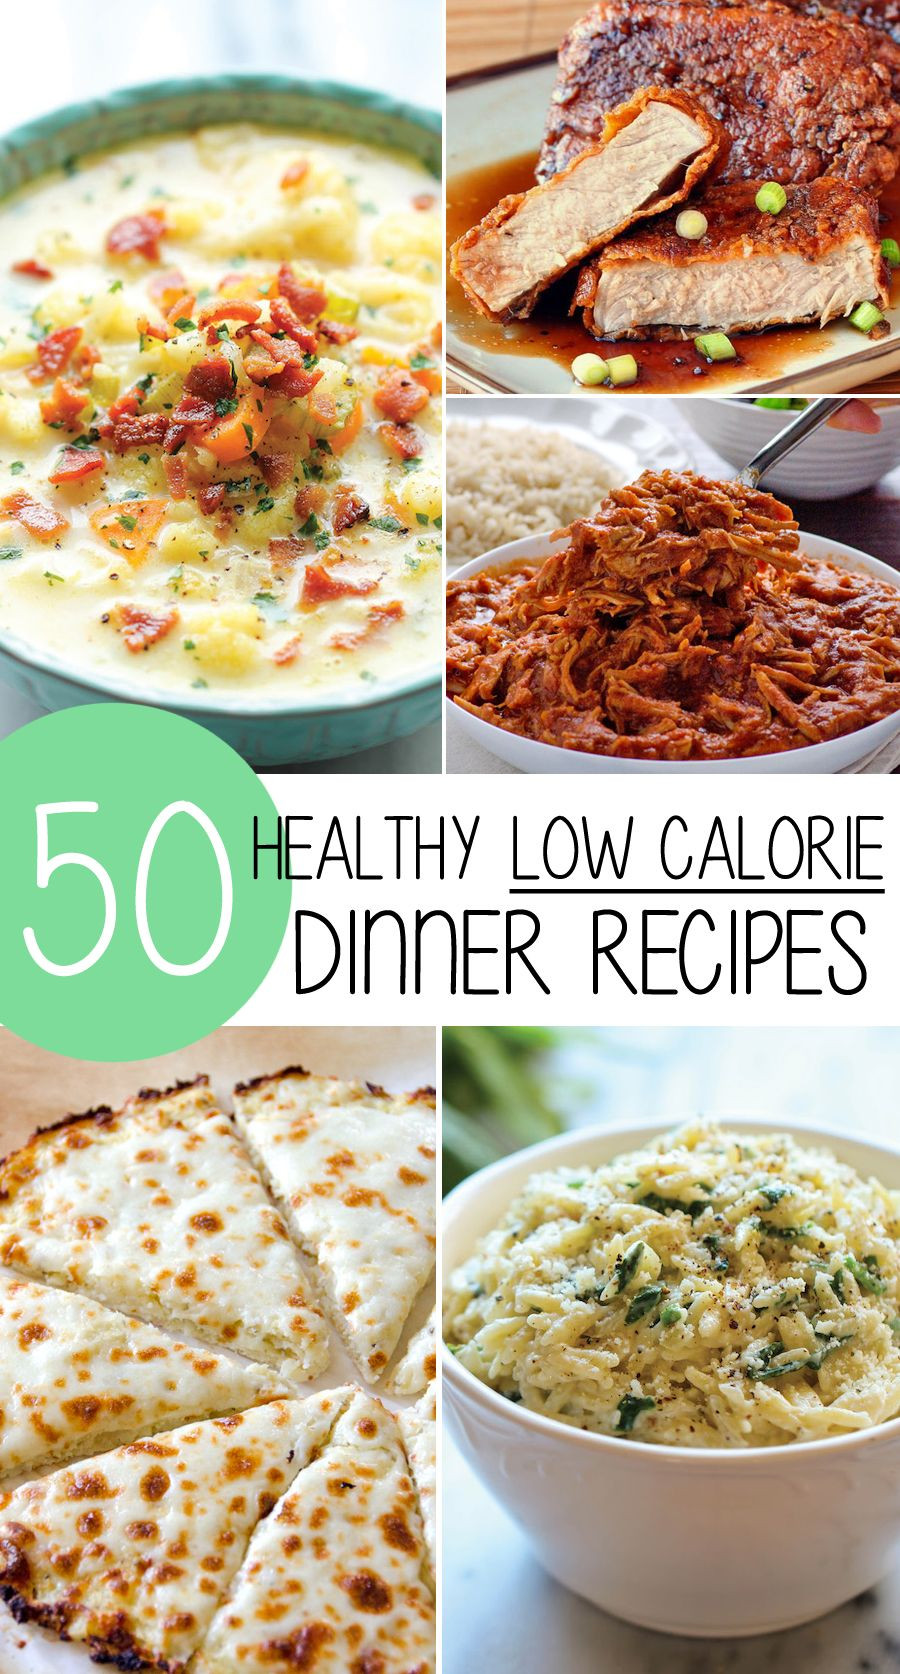 Healthy Low Cholesterol Recipes
 50 Healthy Low Calorie Weight Loss Dinner Recipes